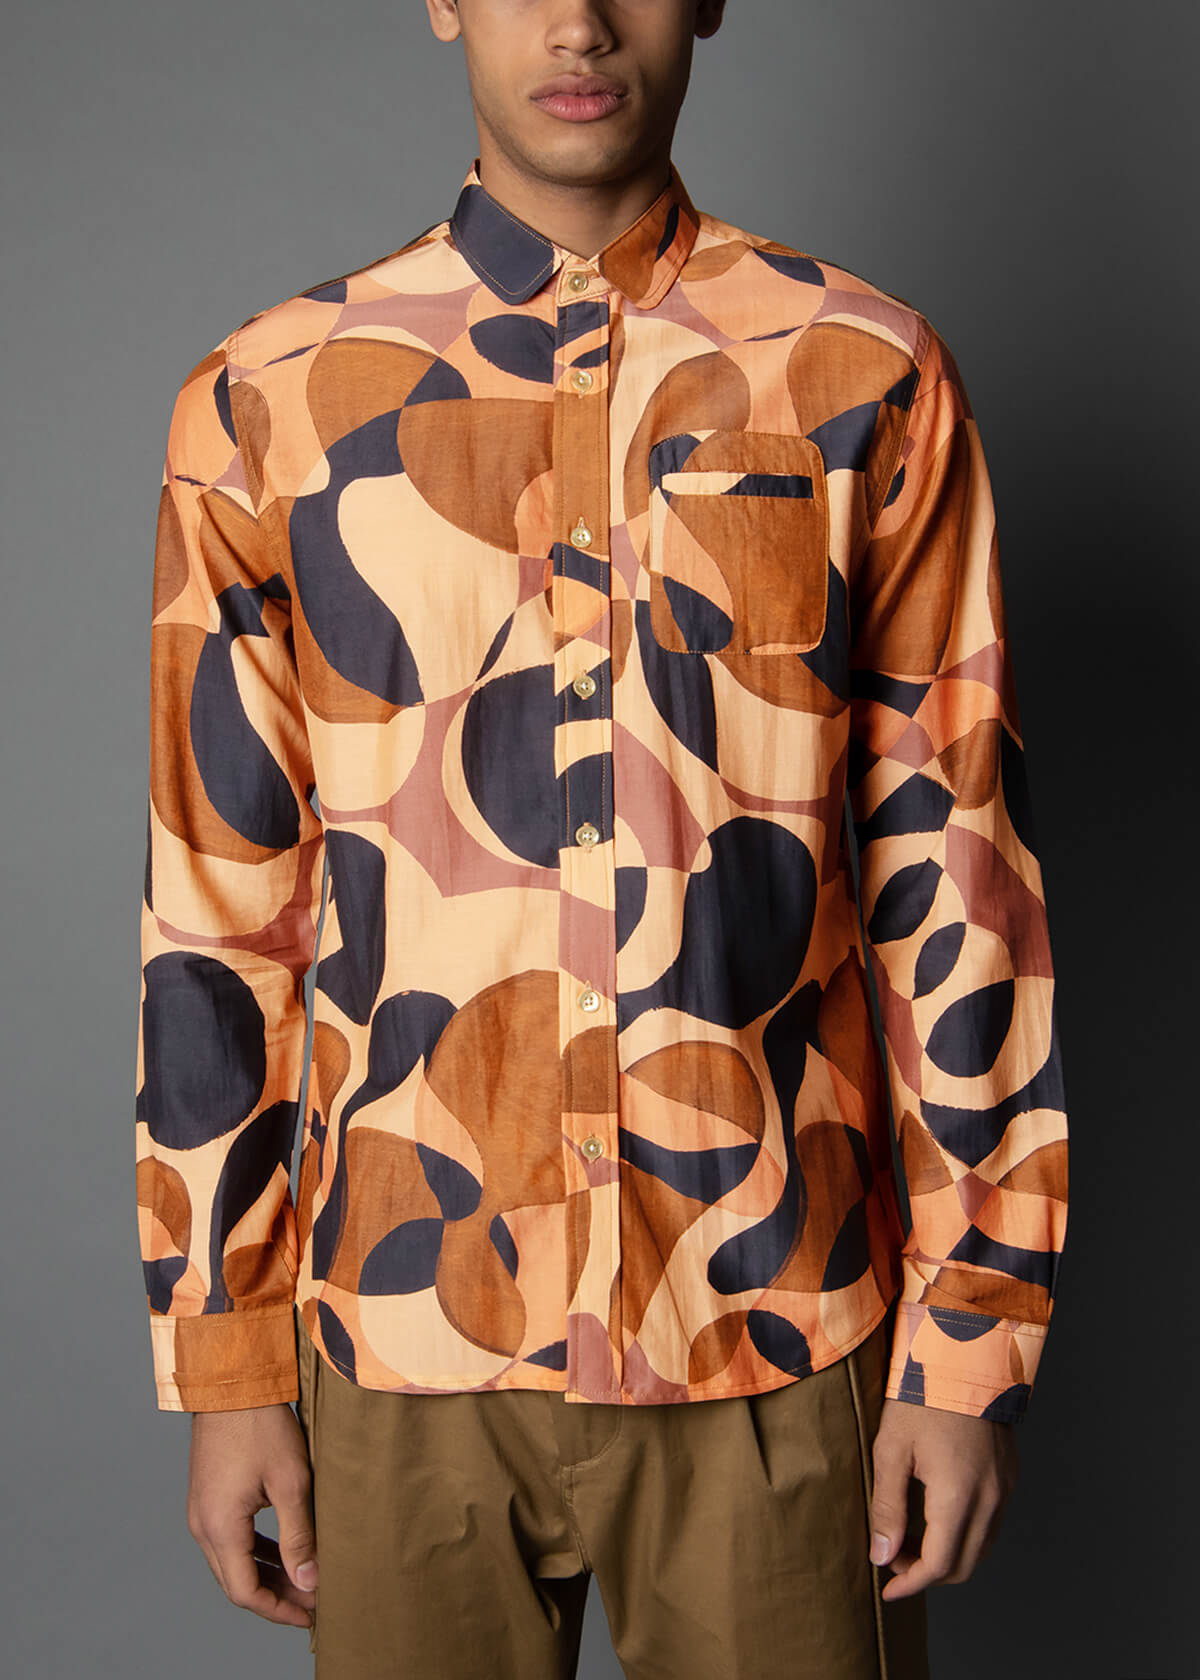 abstract print men's shirt in orange and black